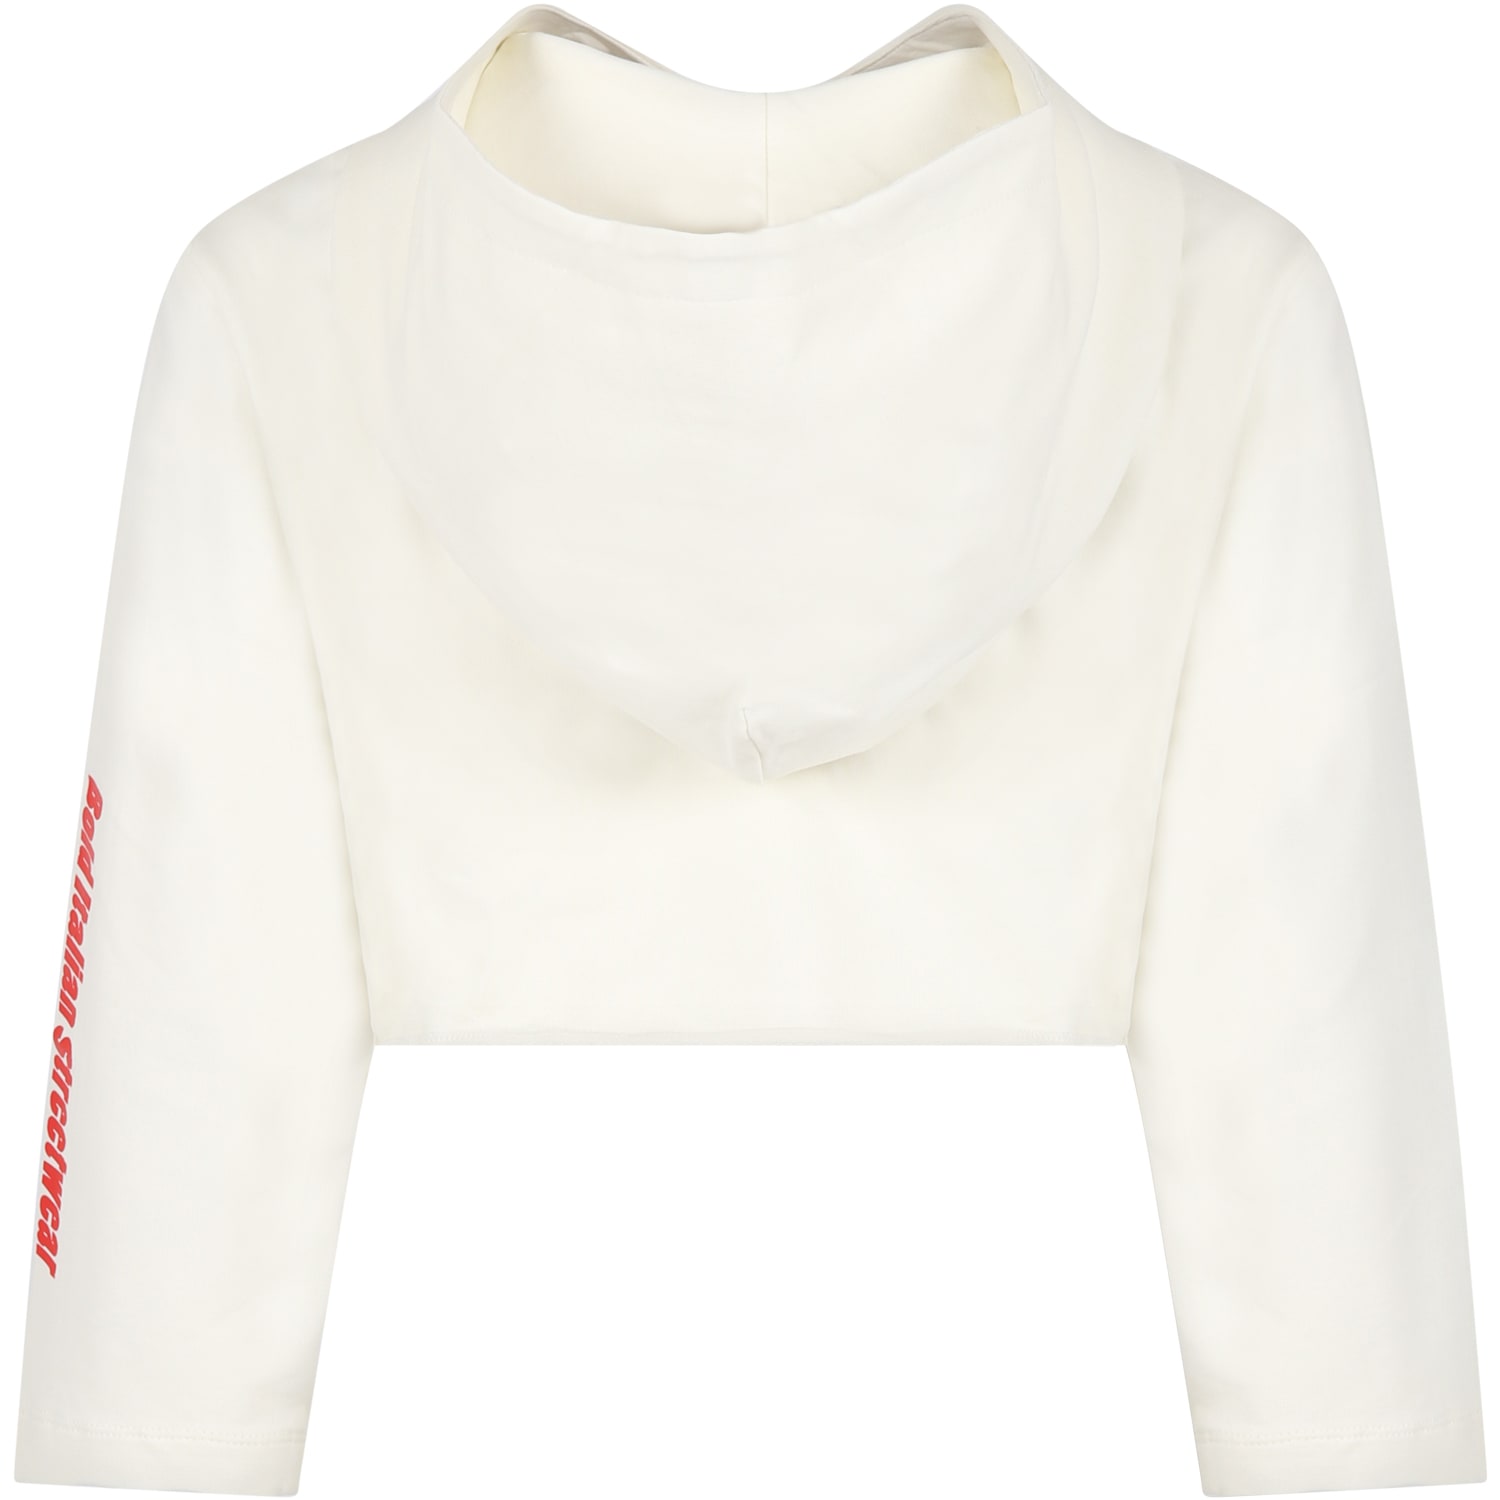 Shop Gcds Mini Sweatshirt For Girl With Print And Writing Ciao Gcds In White